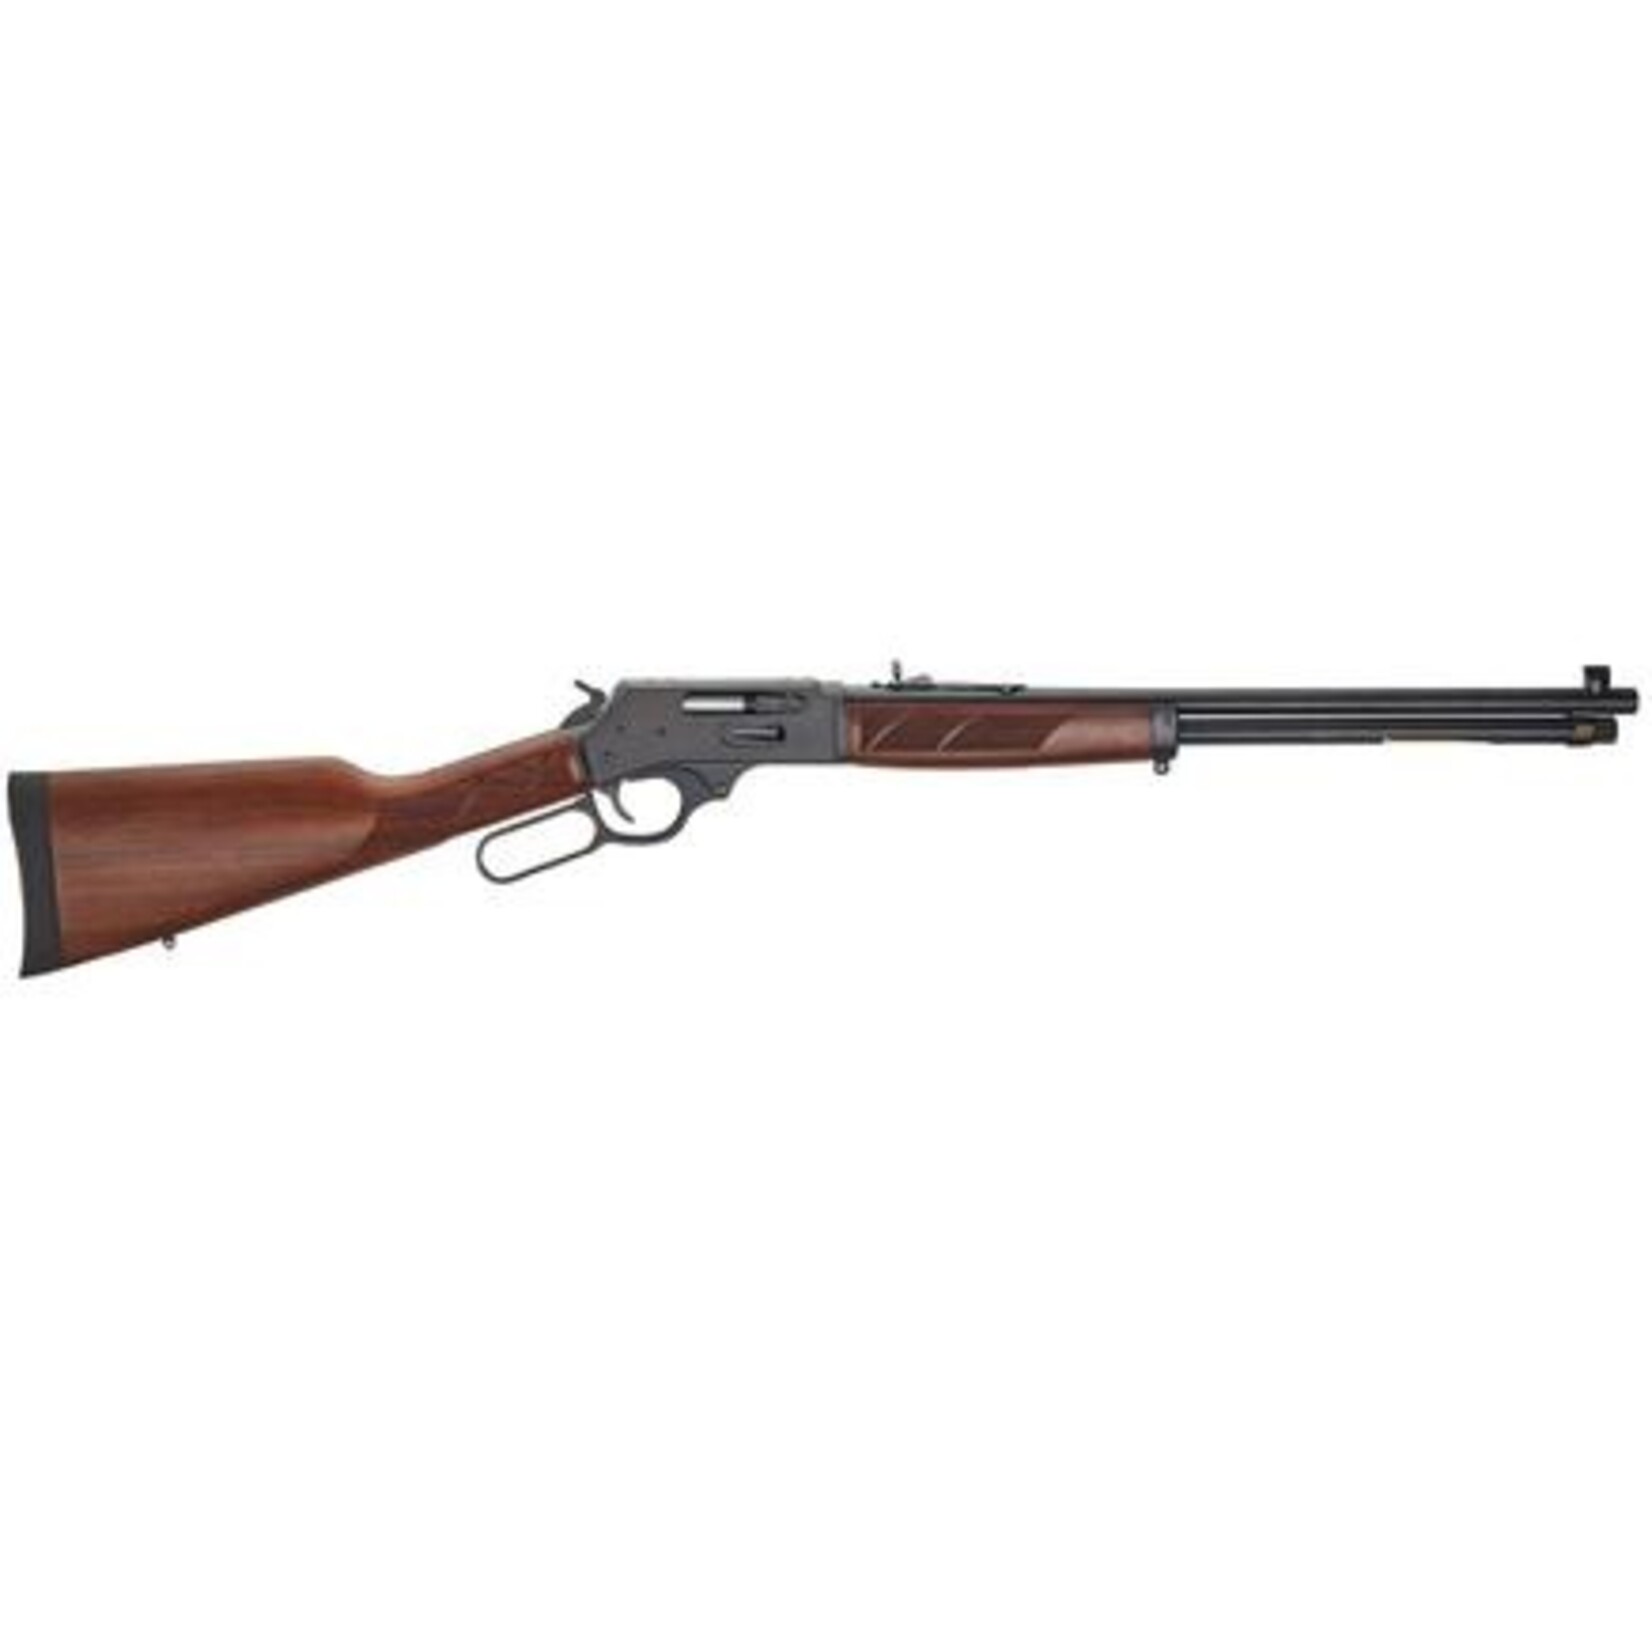 HENRY REPEATING ARMS HENRY 30-30WIN, 20''BBL, WOOD, SIDE GATE, 5+1